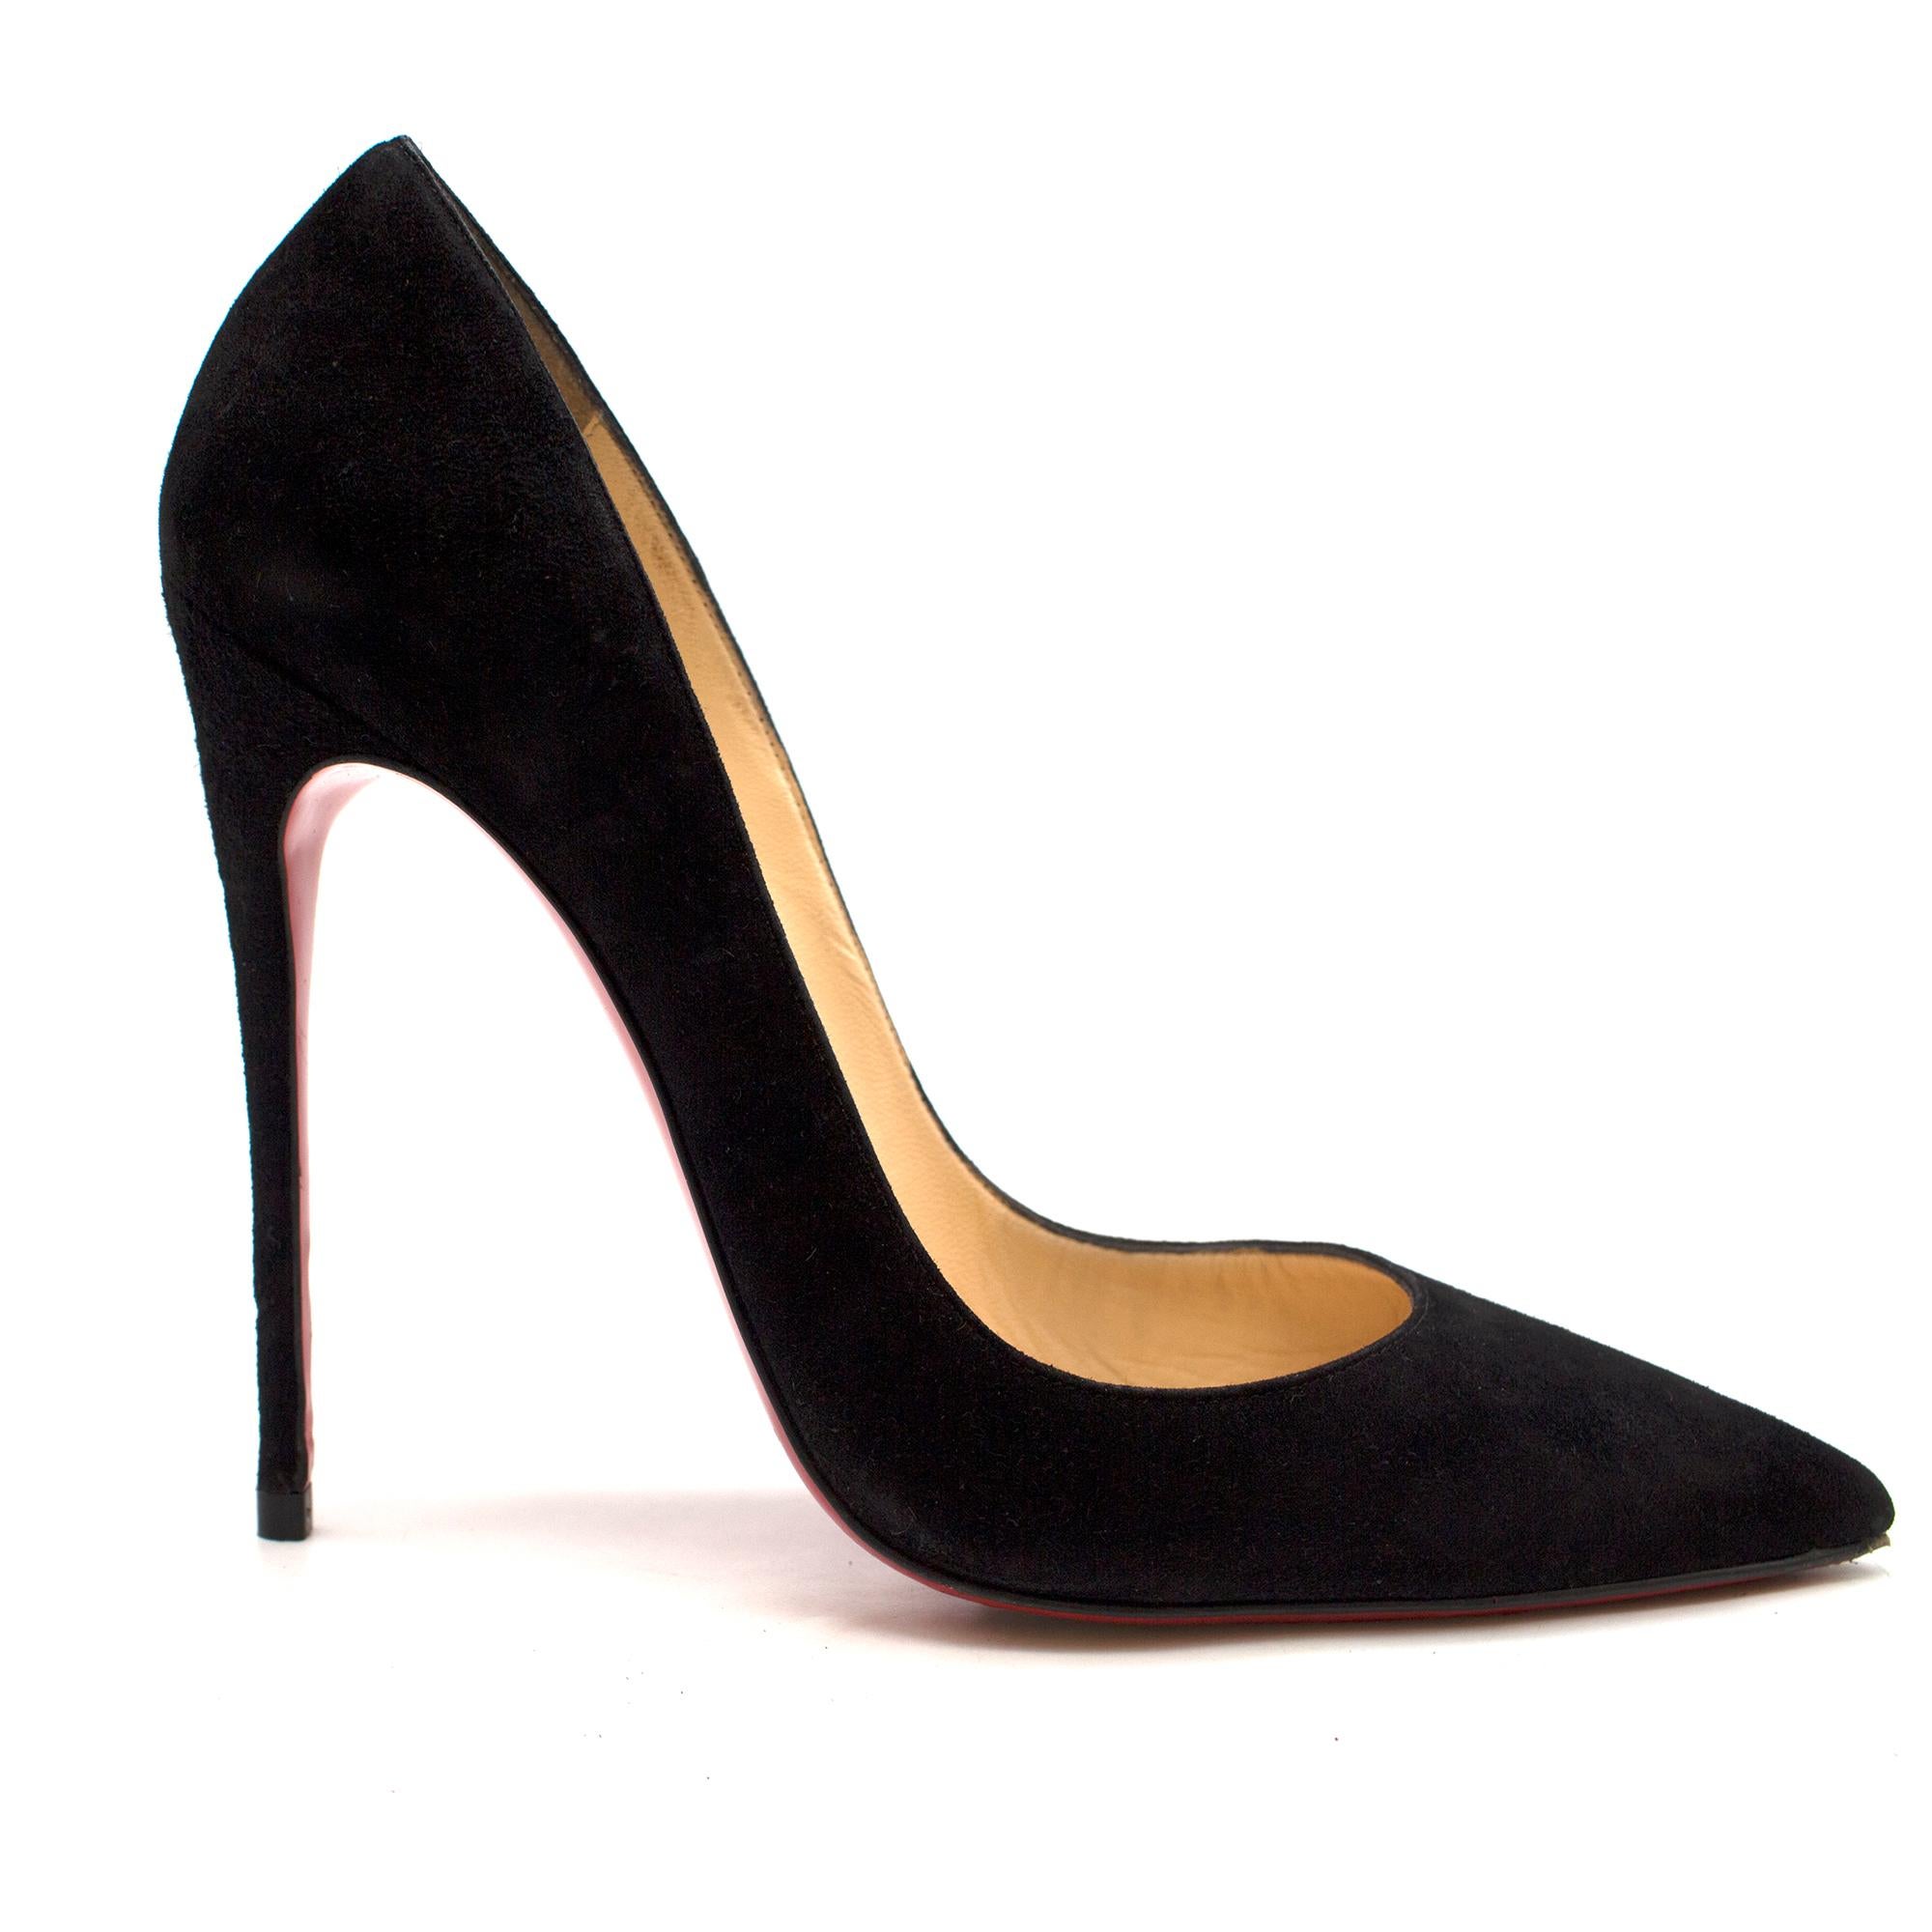 Christian Louboutin So Kate 120mm suede pumps US 8 im Angebot 2